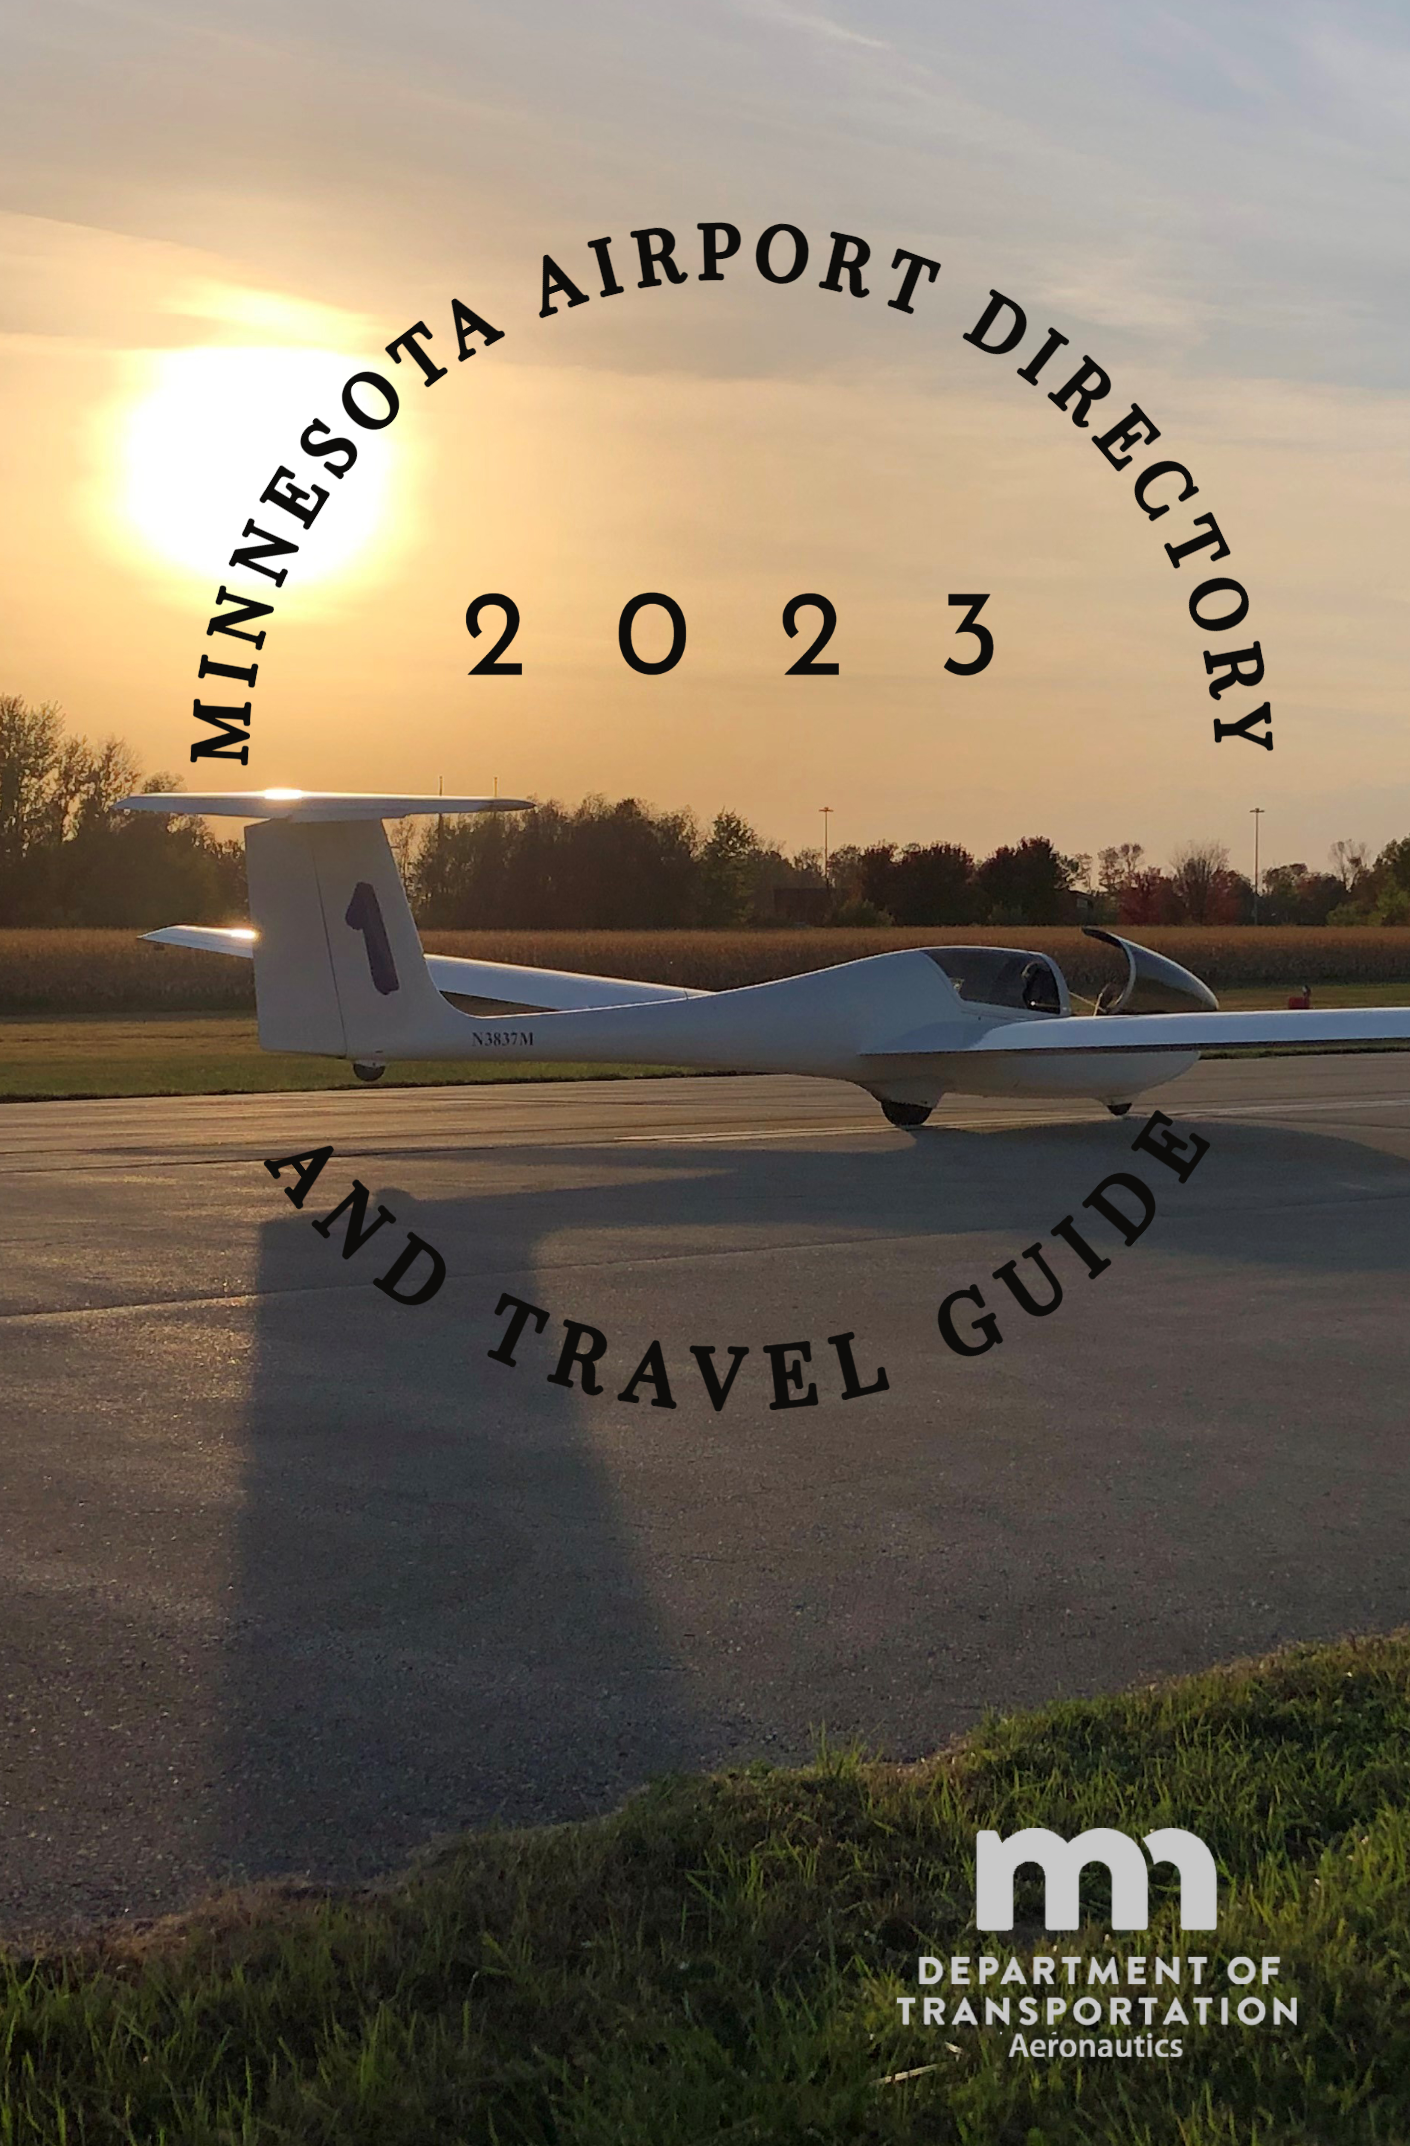 2023 Airport Directory & Travel Guide cover